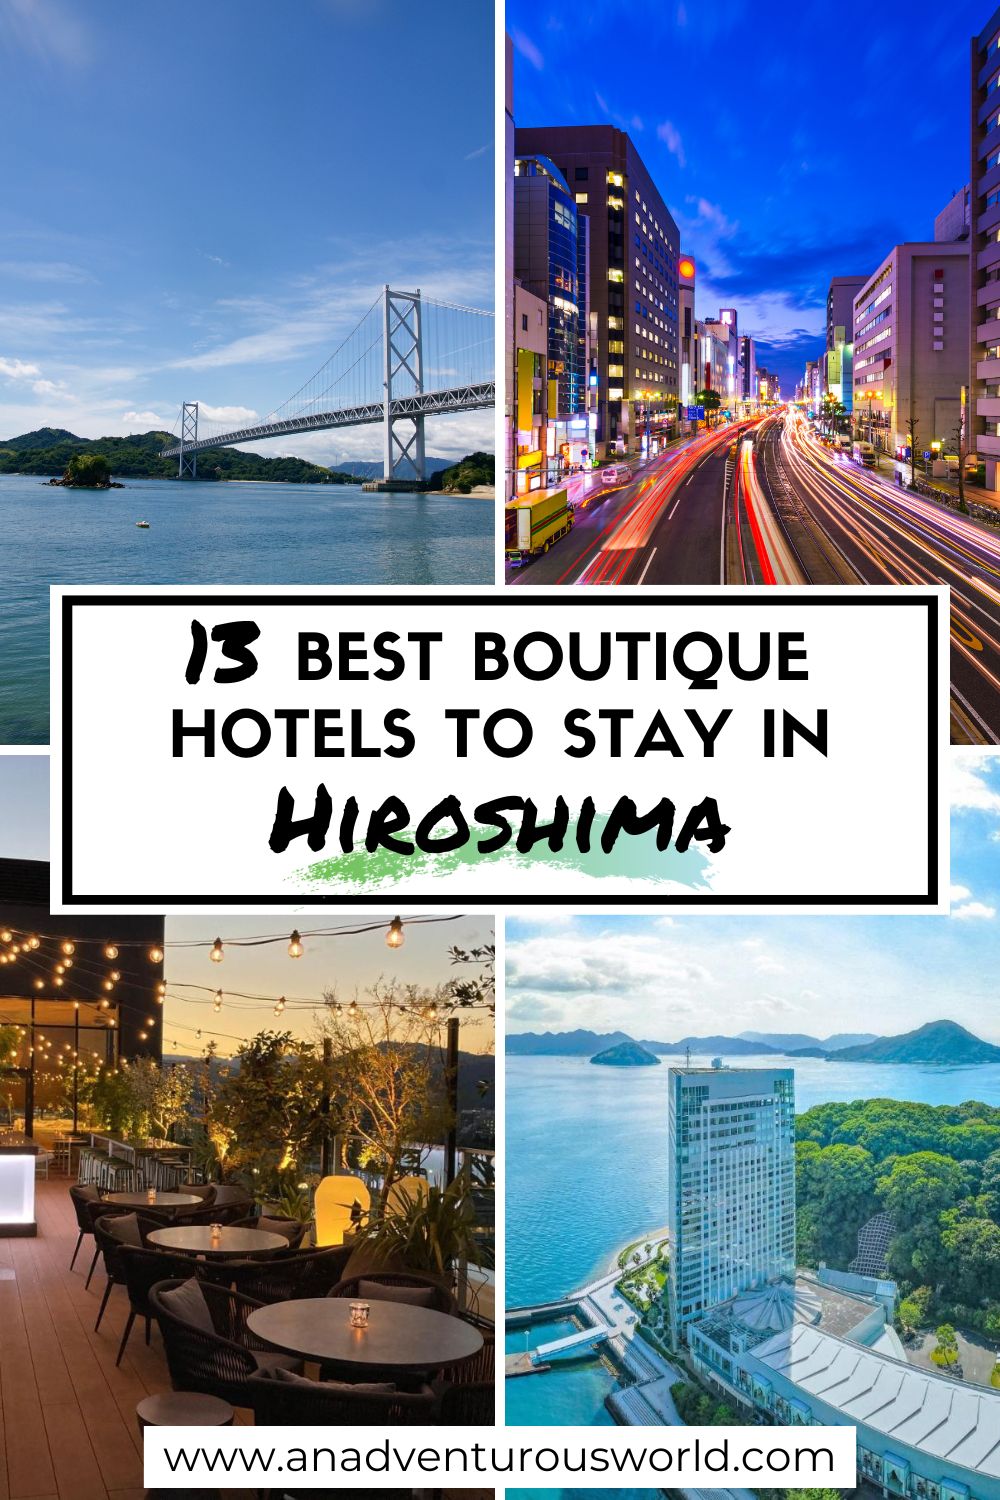 13 Boutique Hotels in Hiroshima, Japan